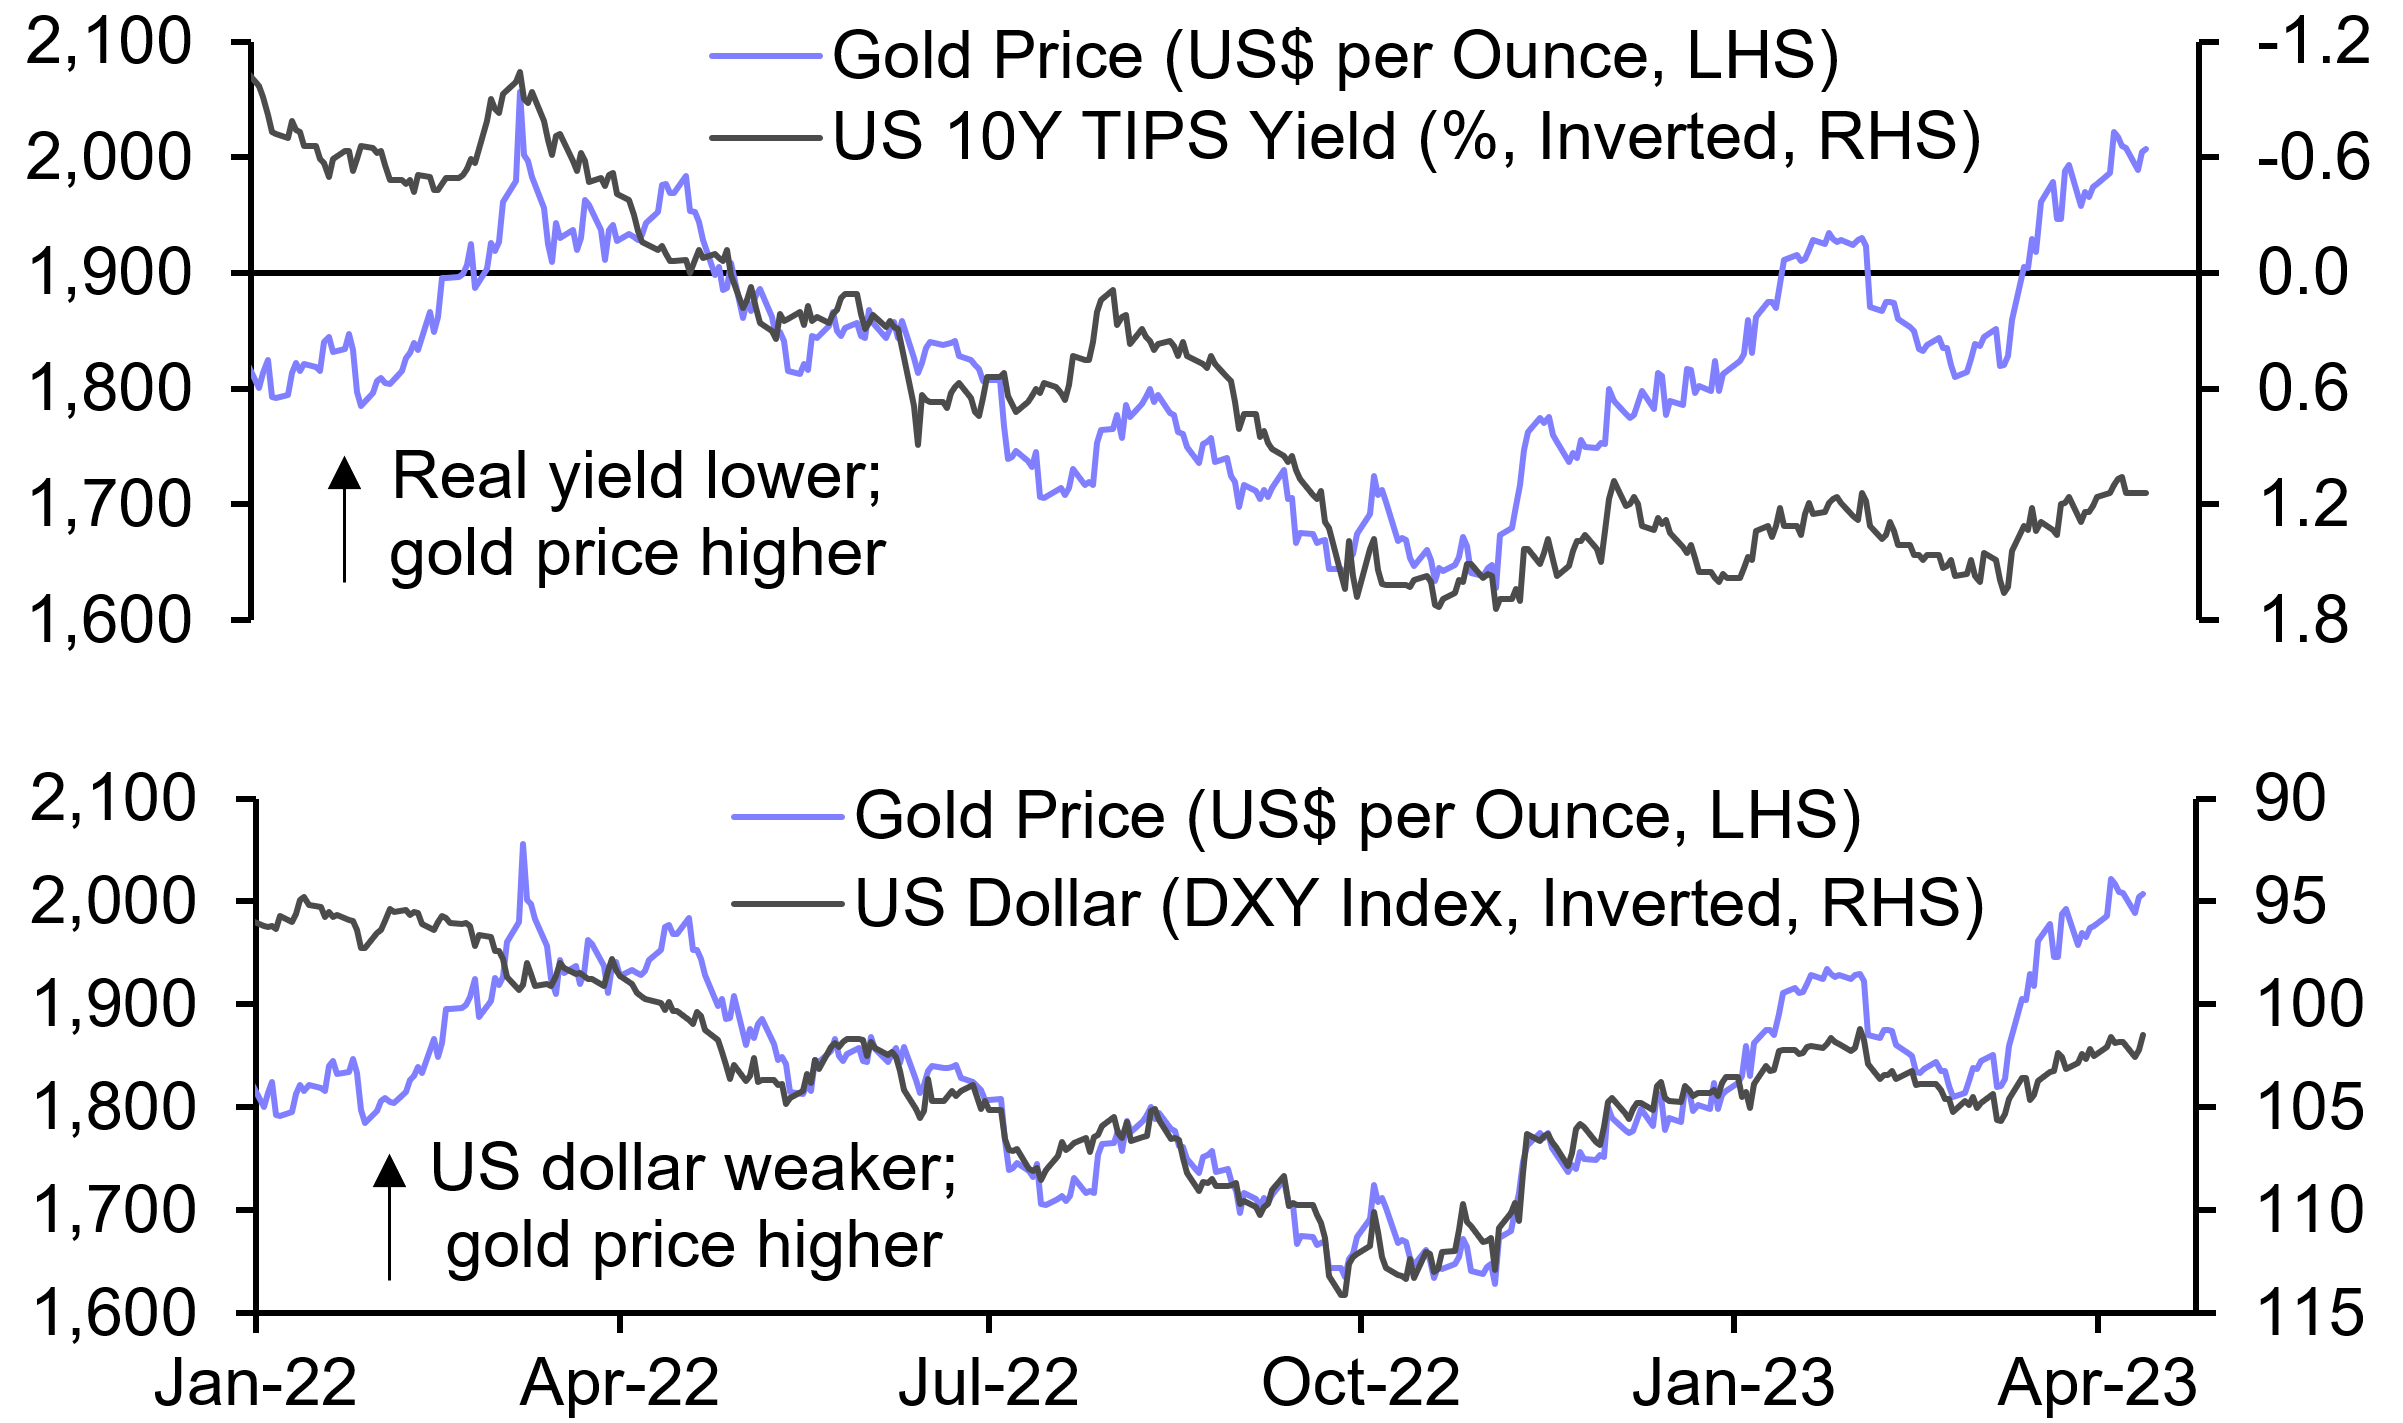 Lower Treasury yields likely to continue supporting gold
